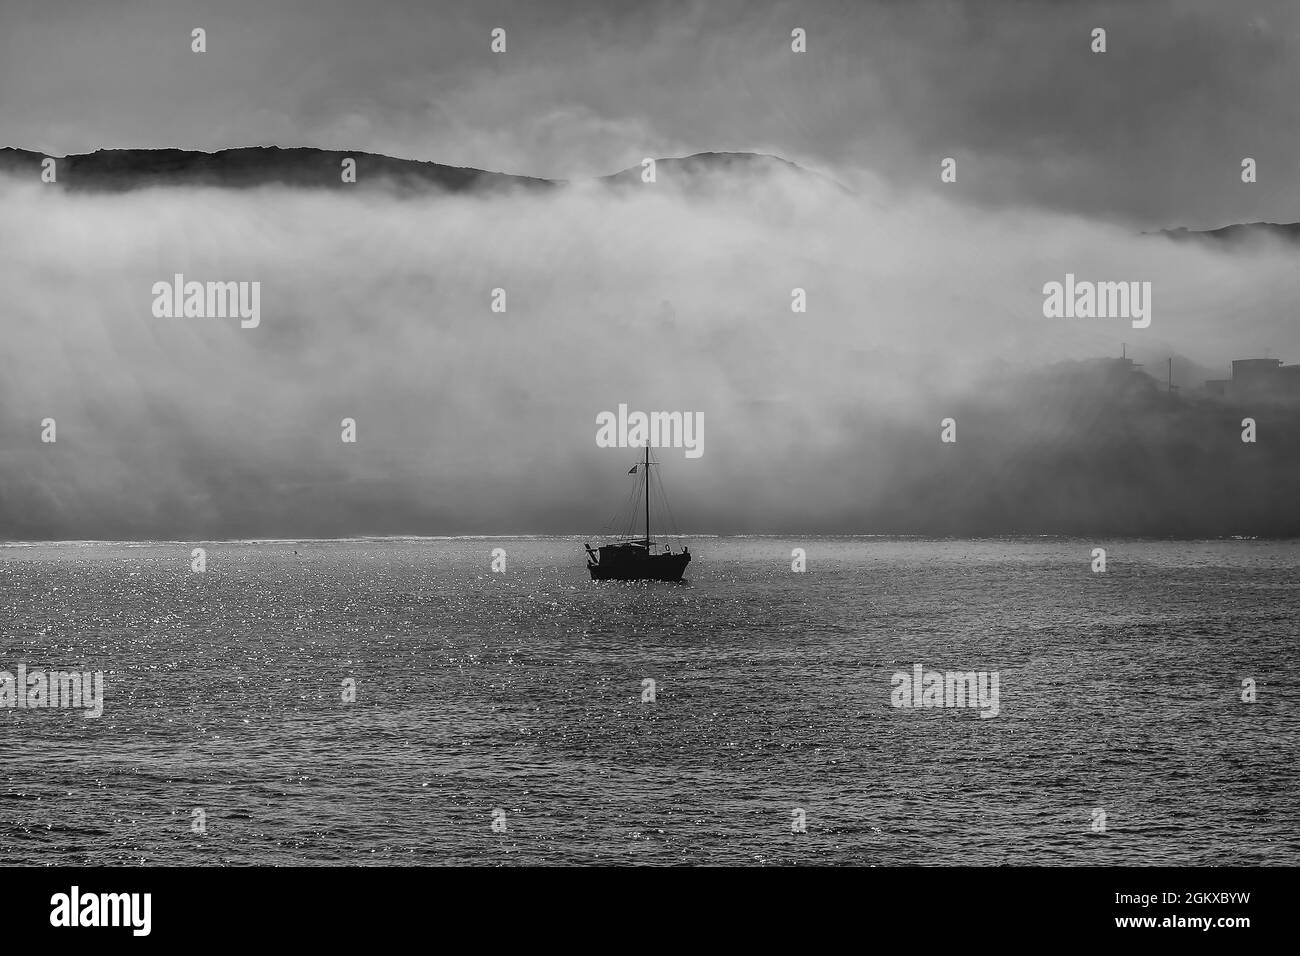 Silhouette Boat In Fog. Fishing boat in the Mediterranean early morning in Summer. Stock Image Stock Photo